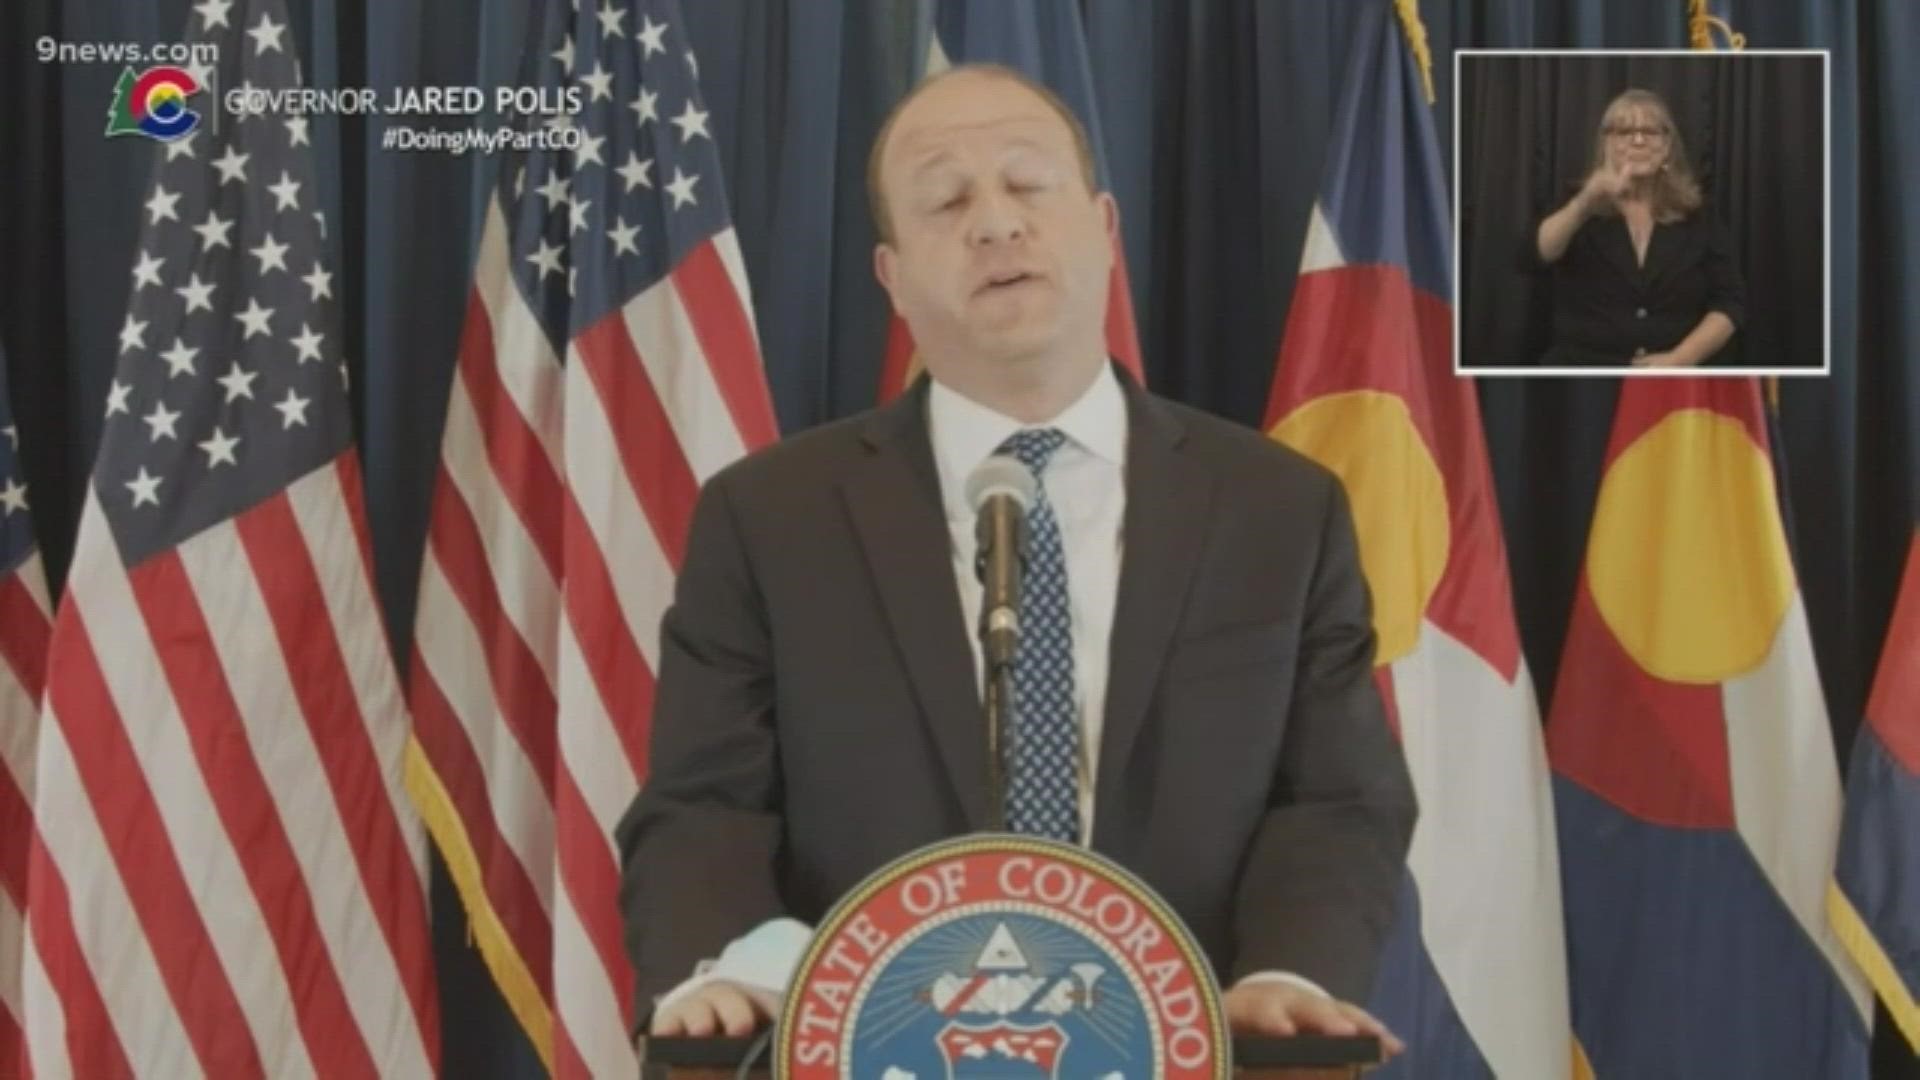 Gov. Jared Polis made the announcement during his weekly news conference on COVID-19.